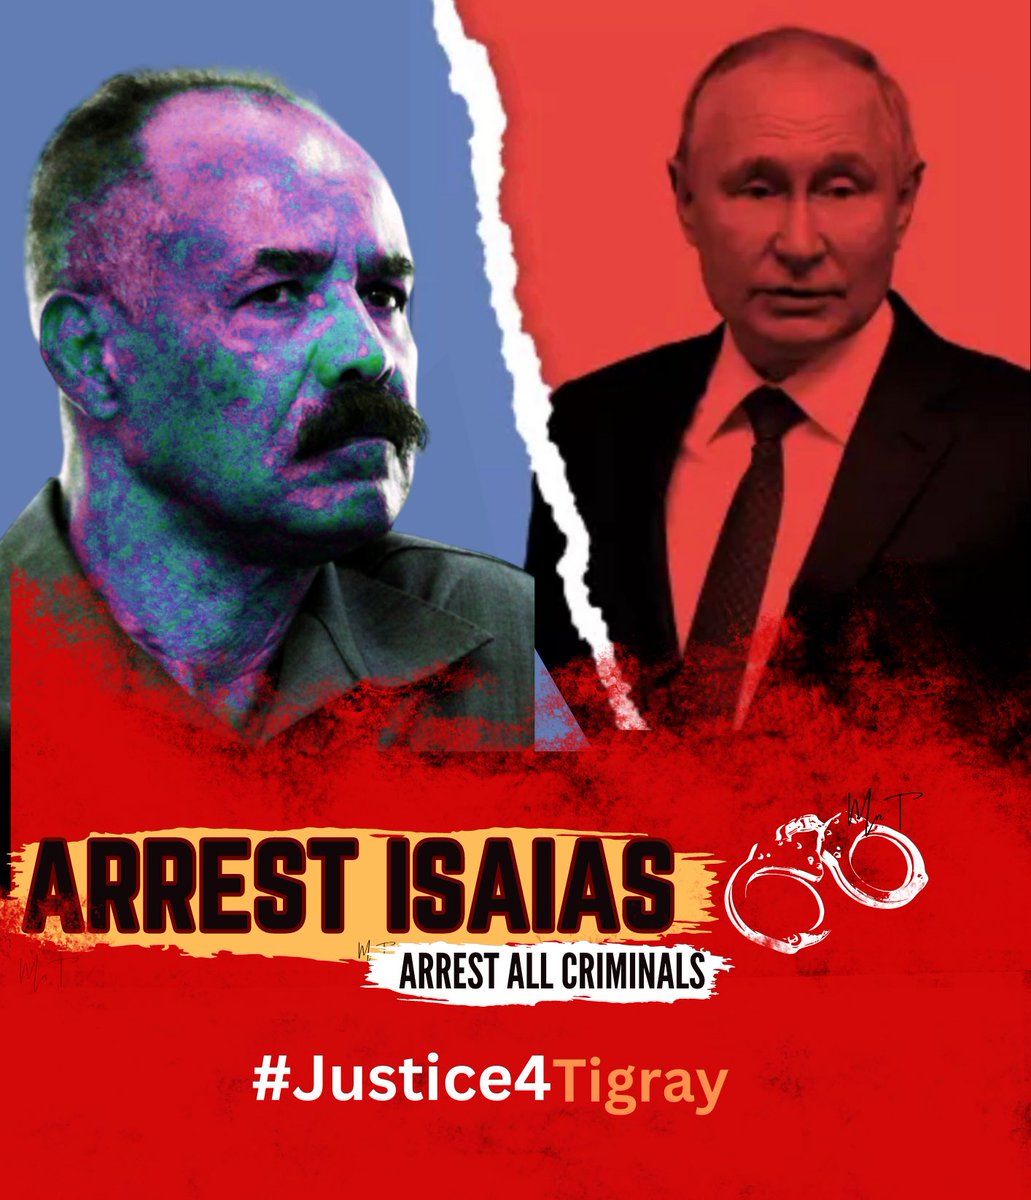 #Russia is assisting Isaias , by military supports & money, to get what it wants in the Red Sea & to get the allies to support & cover their crime’s . 
IC ACT STOP  Isaias #RussiaStopAssistingEritrea @NATO 
#TigrayGenocide @SecBlinken @JosepBorrellF @MikeHammerUSA